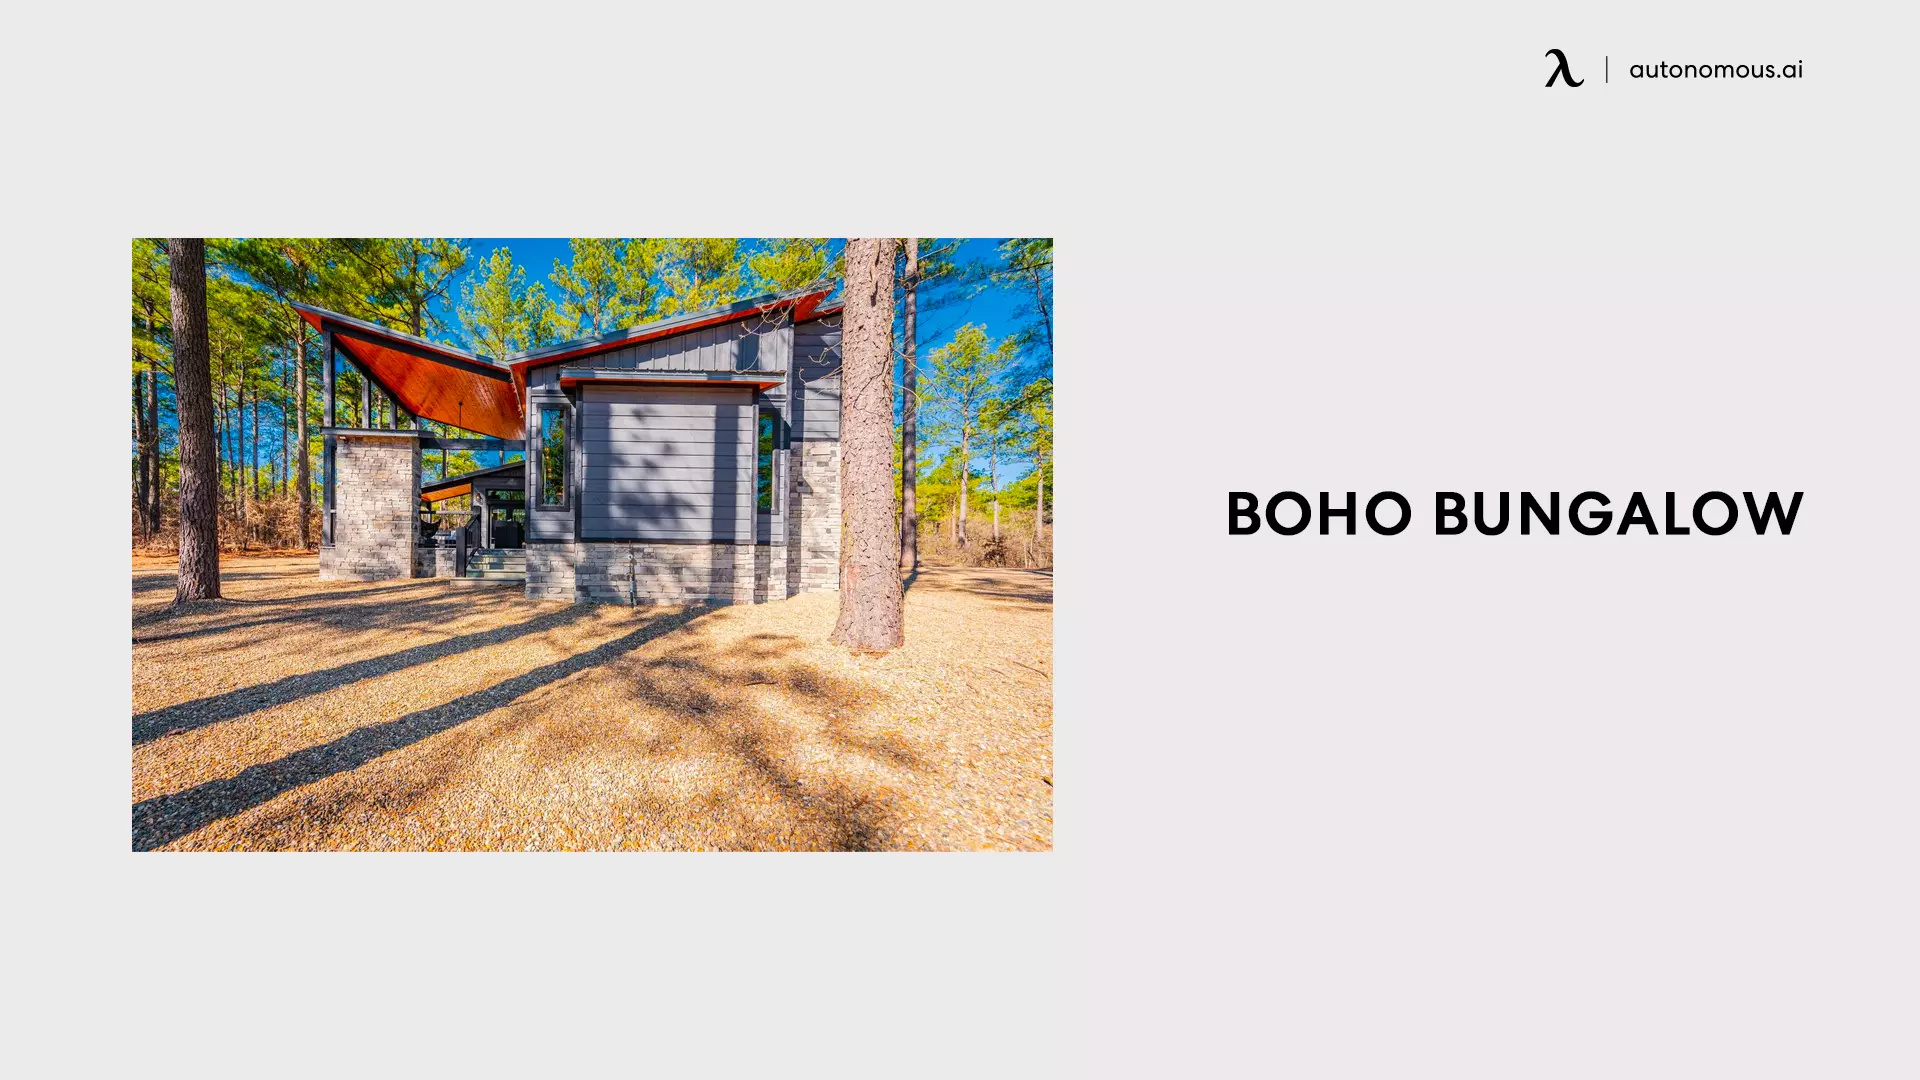 Boho Bungalow – Bohemian-Styled Airbnb shed